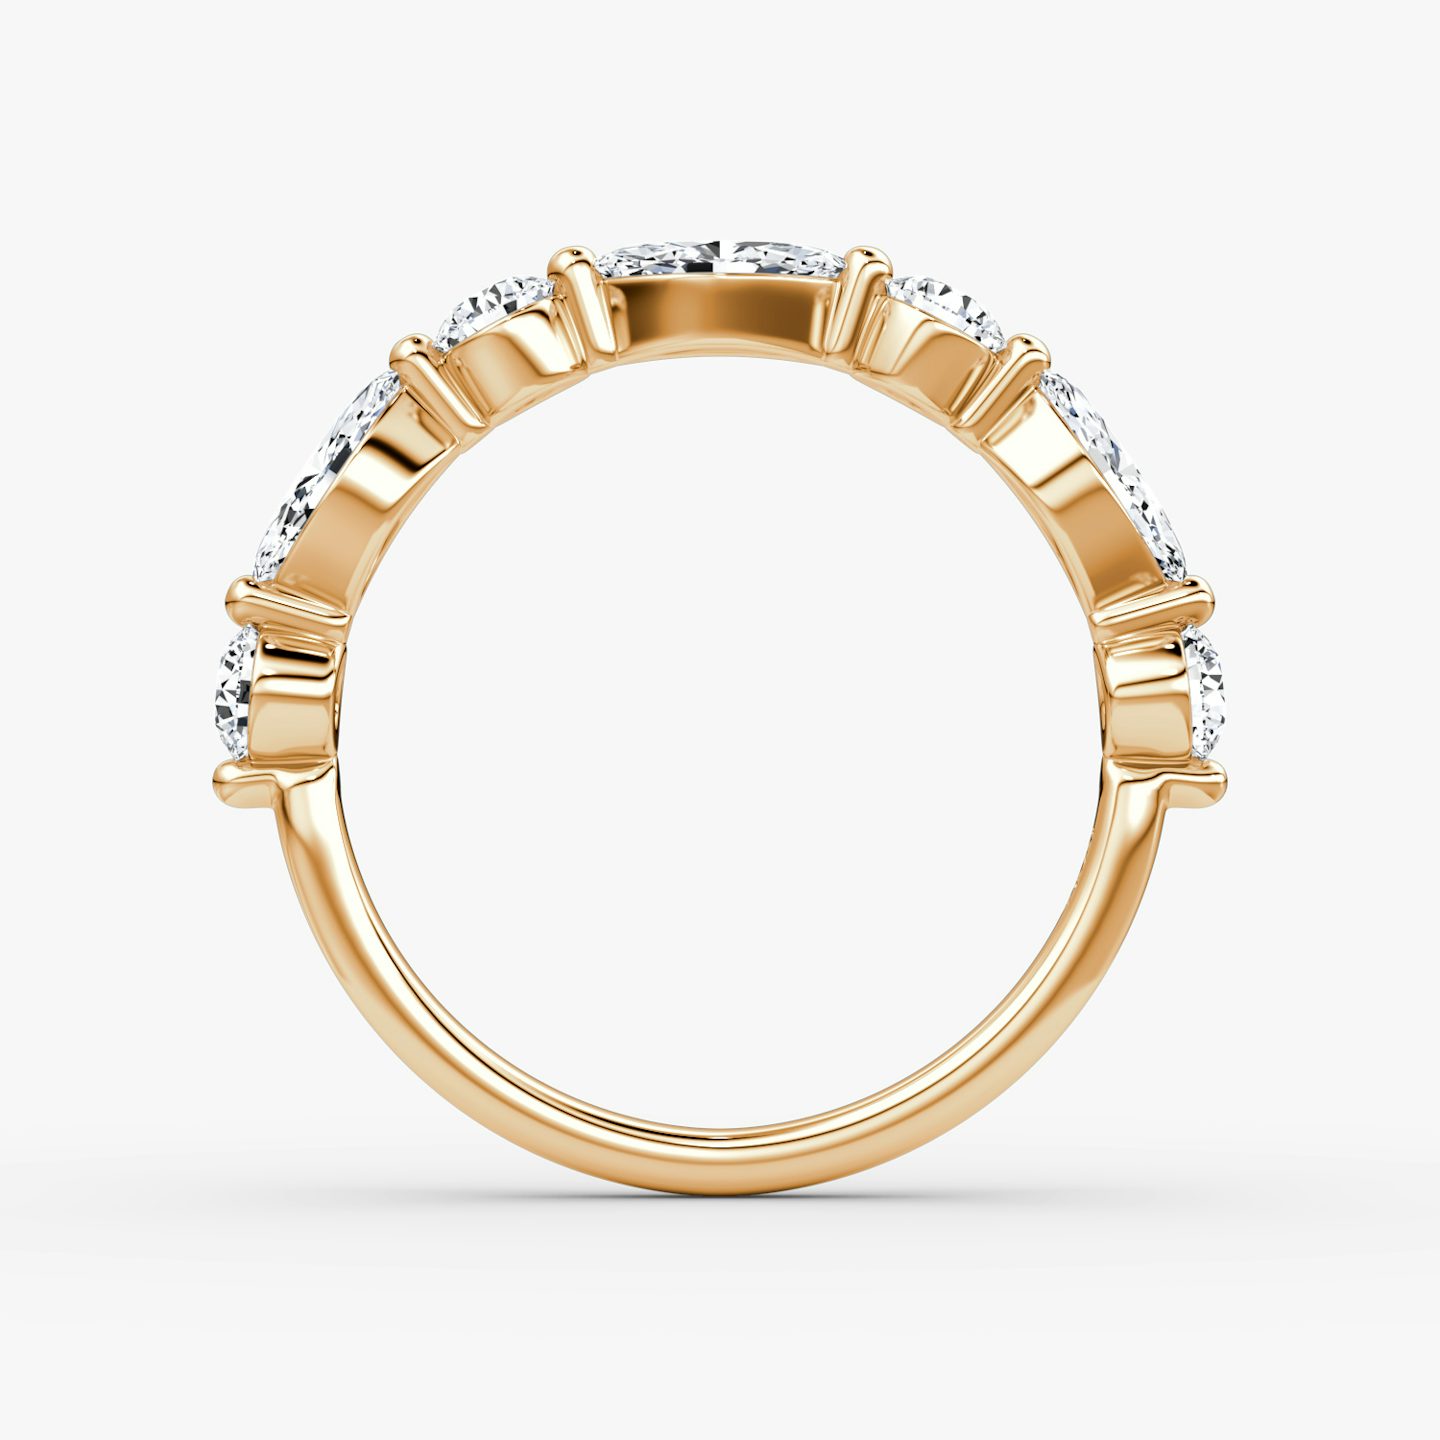 Bague Mixte Single Shared Prong | round-brilliant+marquise | 14k | Or rose 14 carats